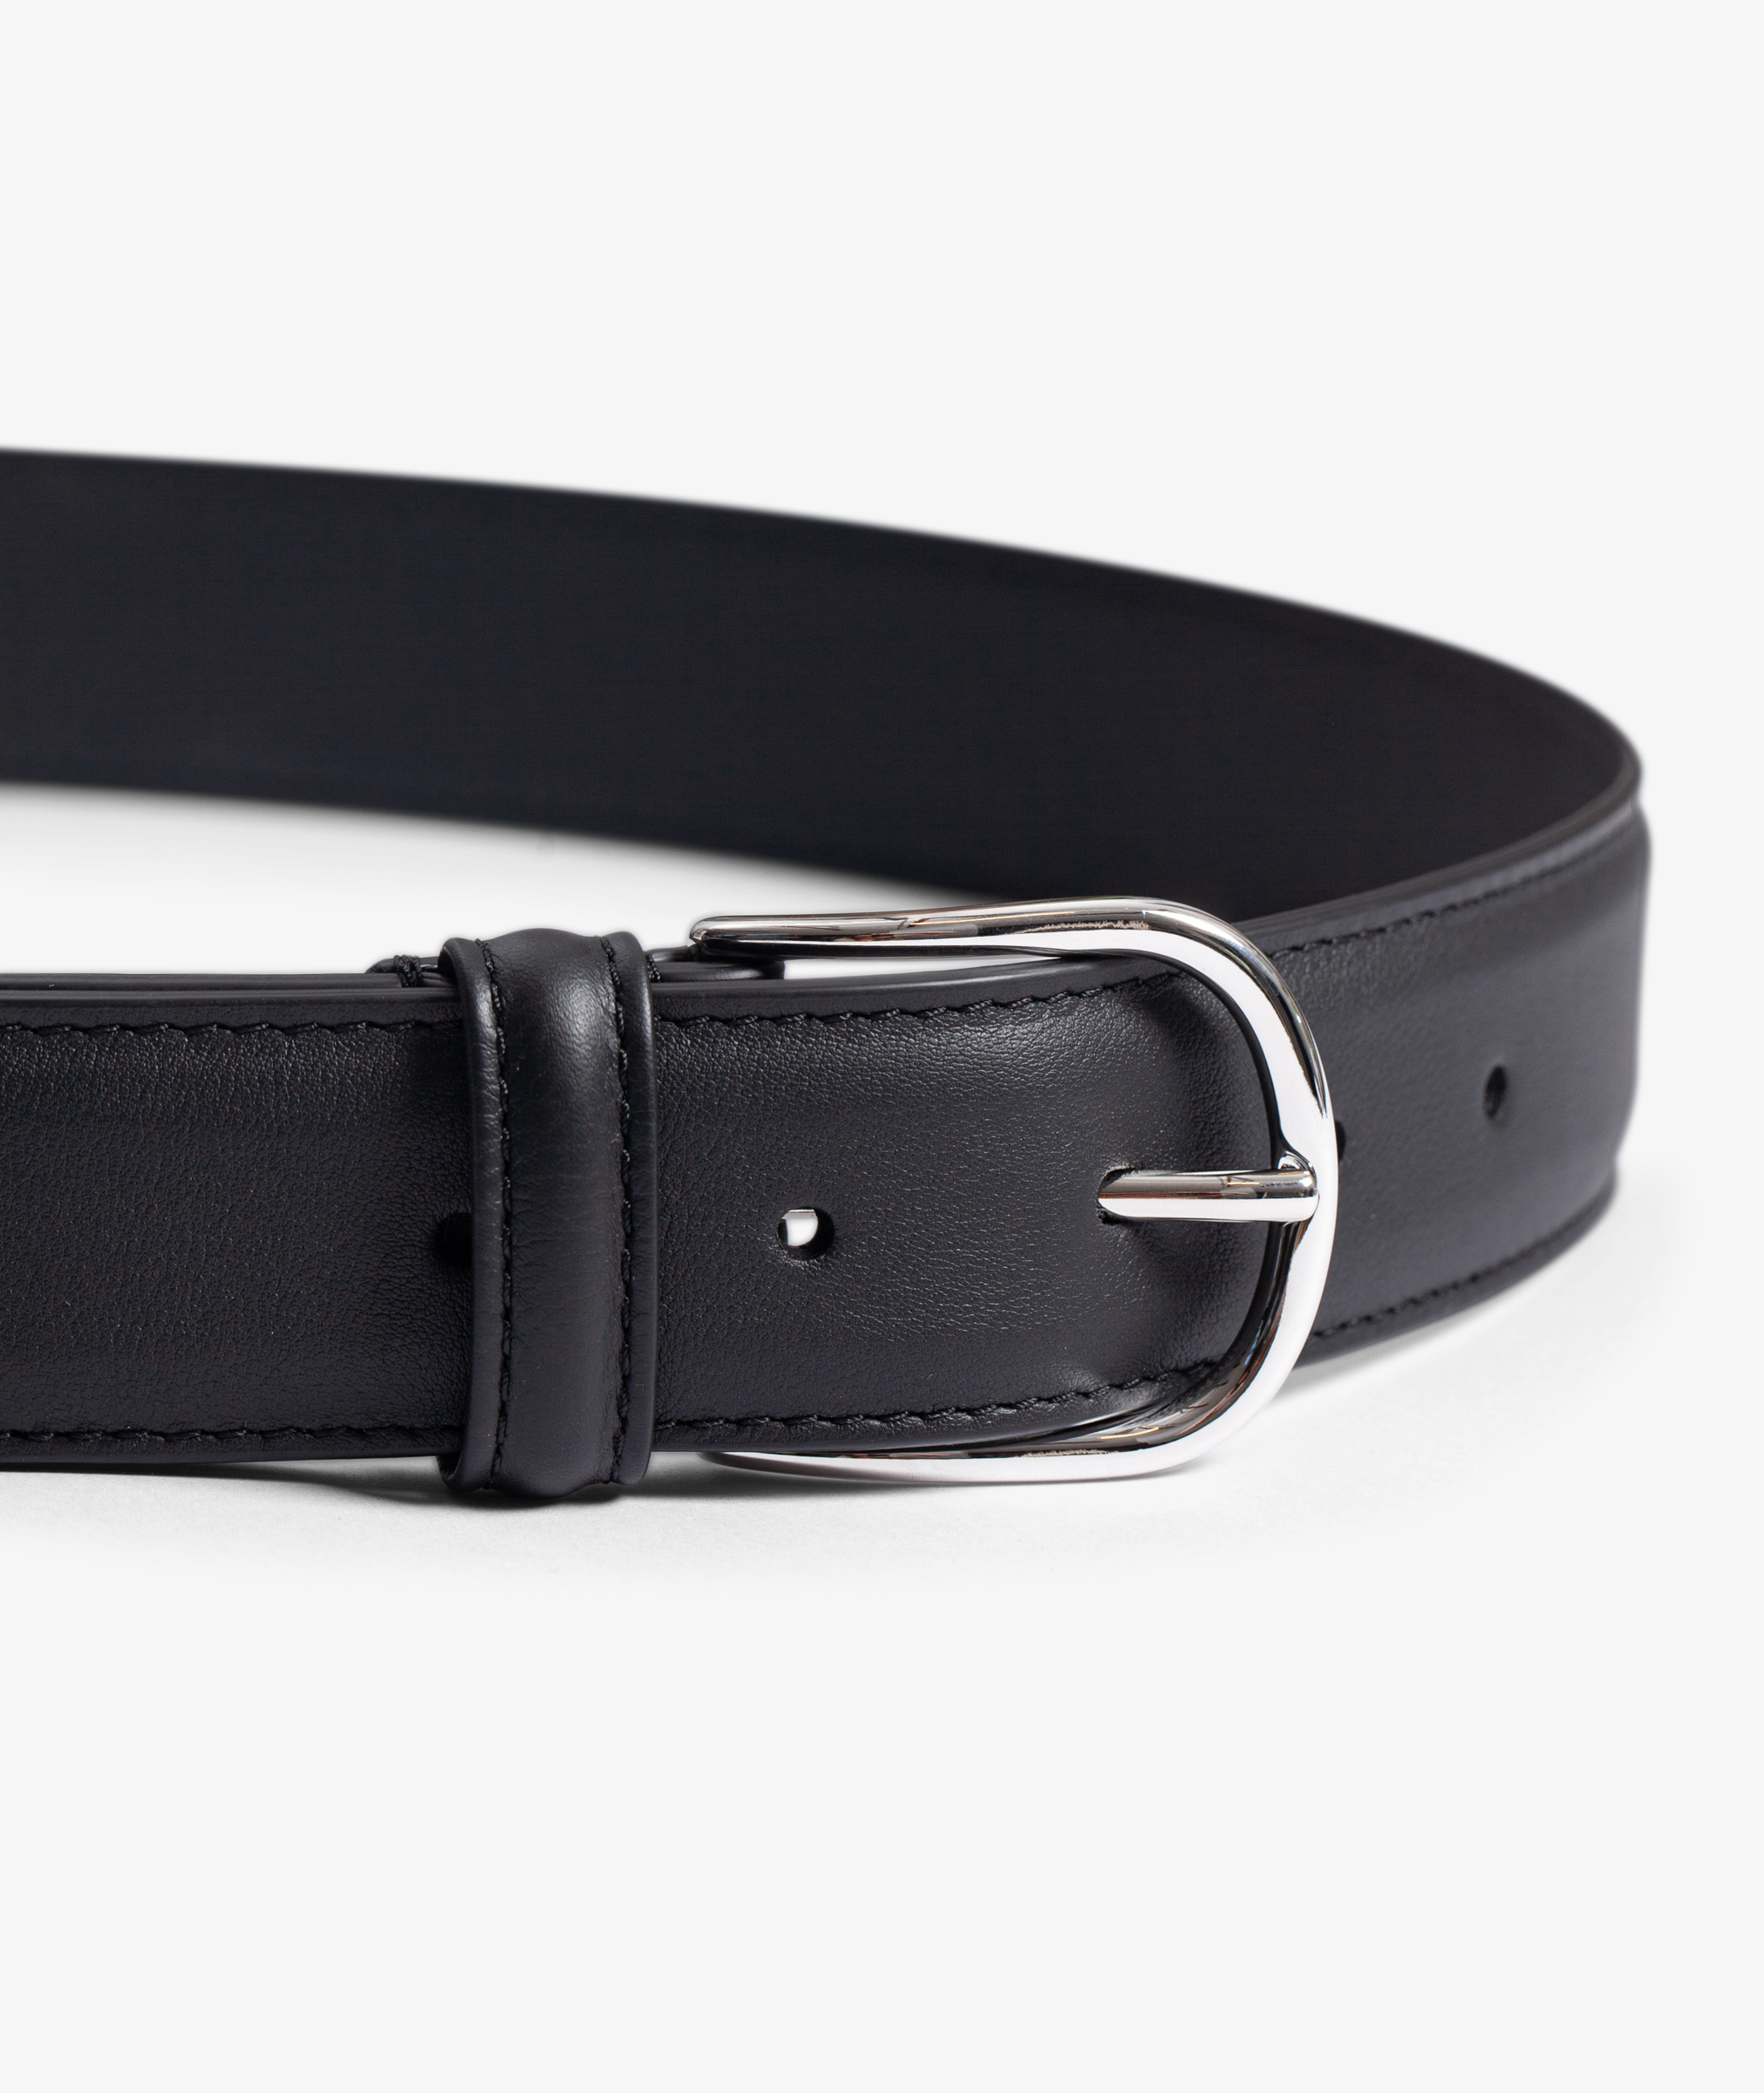 Norse Store | Shipping Worldwide - Anderson's Classic Leather Belt - Black